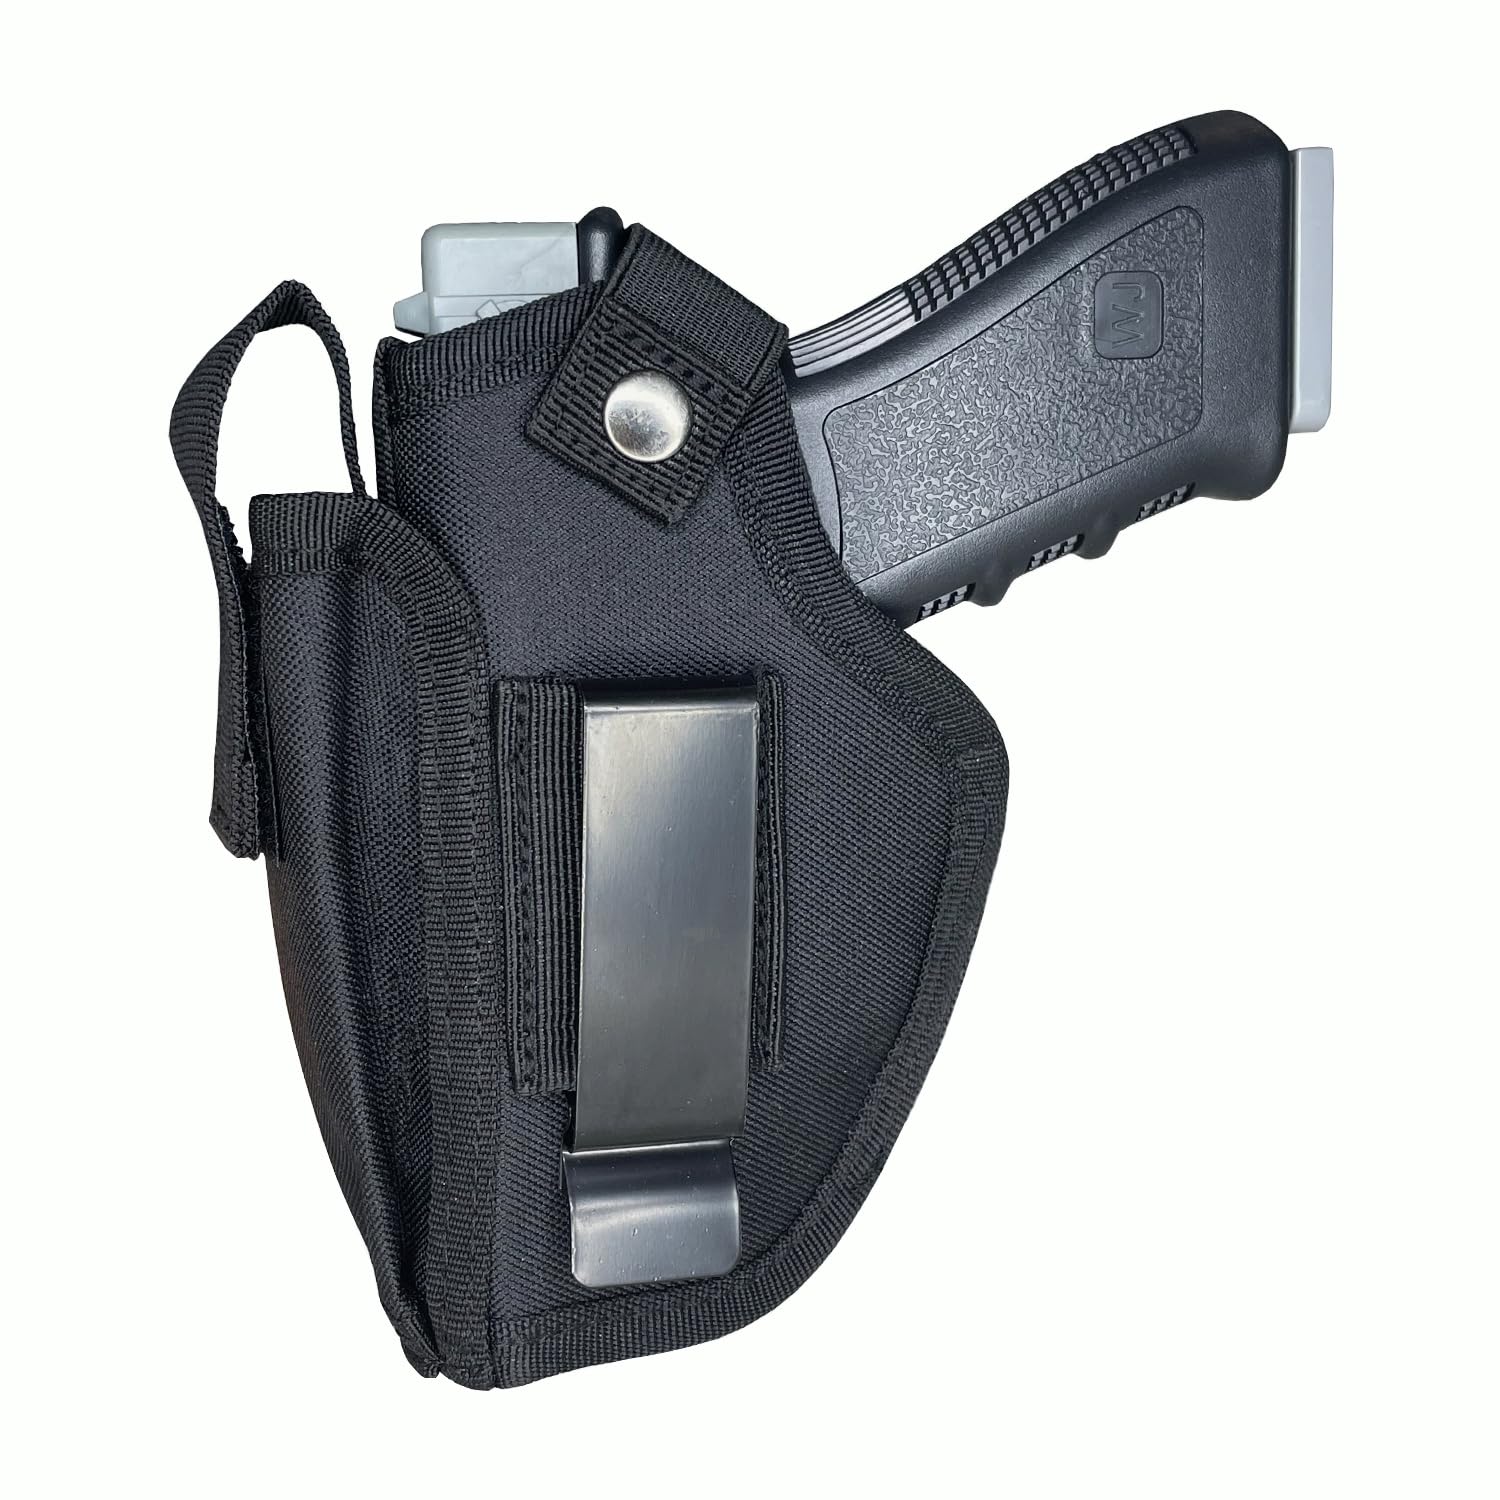 Vacod Universal Gun Holster with Mag Pouch for Concealed Carry Inside or Outside The Waistband Pistols Holsters for Right and Left Hand Draw Holster for Men/Women Black